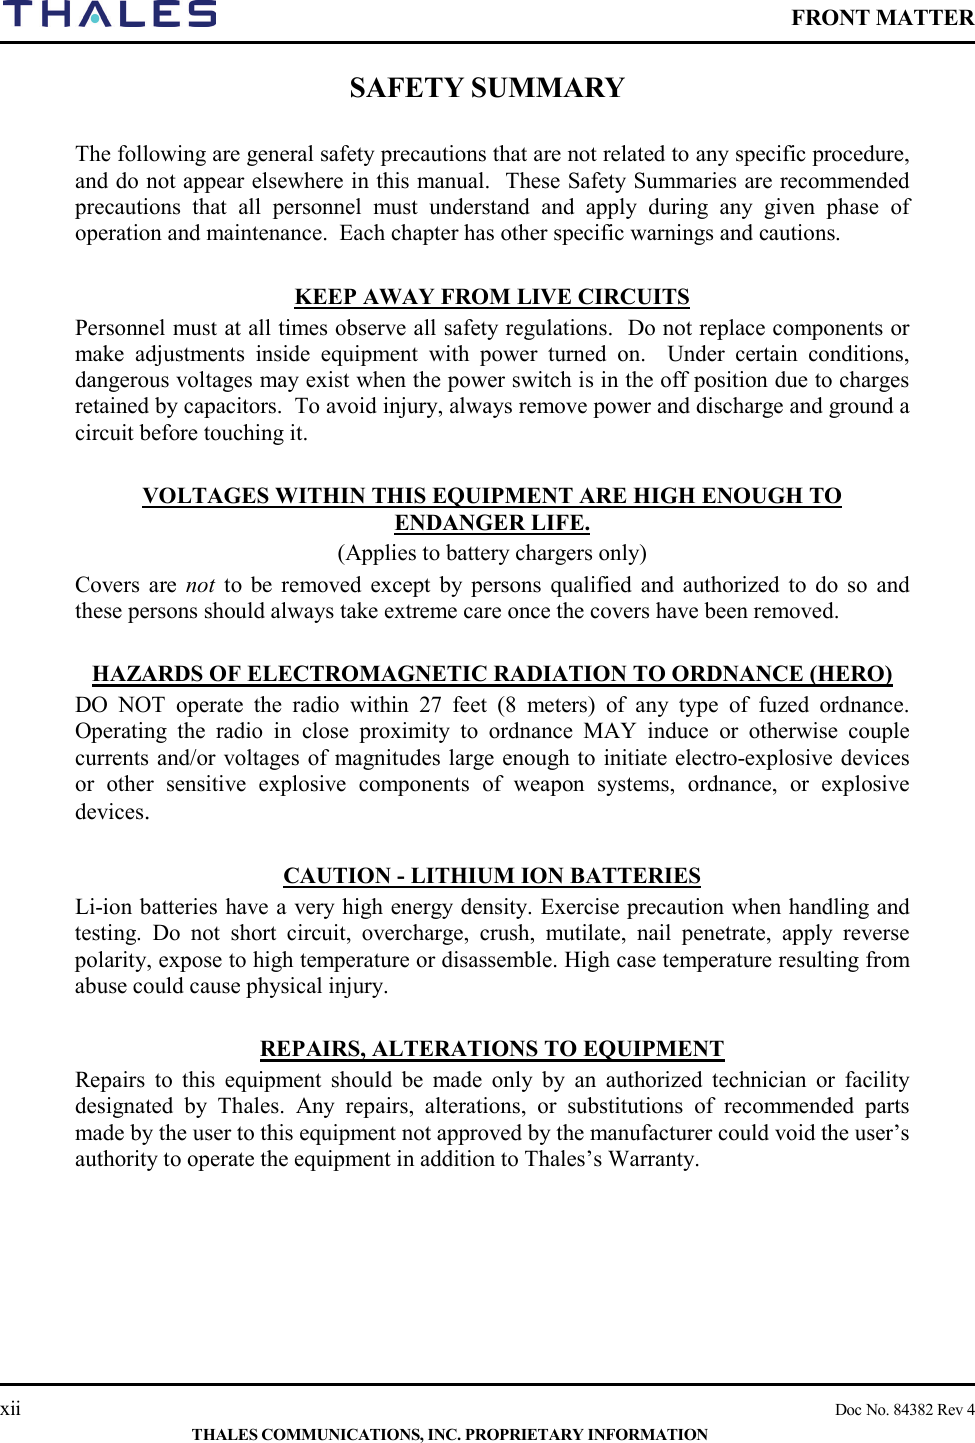    FRONT MATTER    xii    Doc No. 84382 Rev 4  THALES COMMUNICATIONS, INC. PROPRIETARY INFORMATION SAFETY SUMMARY  The following are general safety precautions that are not related to any specific procedure, and do not appear elsewhere in this manual.  These Safety Summaries are recommended precautions that all personnel must understand and apply during any given phase of operation and maintenance.  Each chapter has other specific warnings and cautions.  KEEP AWAY FROM LIVE CIRCUITS Personnel must at all times observe all safety regulations.  Do not replace components or make adjustments inside equipment with power turned on.  Under certain conditions, dangerous voltages may exist when the power switch is in the off position due to charges retained by capacitors.  To avoid injury, always remove power and discharge and ground a circuit before touching it.  VOLTAGES WITHIN THIS EQUIPMENT ARE HIGH ENOUGH TO ENDANGER LIFE. (Applies to battery chargers only) Covers are not to  be removed except by persons qualified and authorized to do so and these persons should always take extreme care once the covers have been removed.  HAZARDS OF ELECTROMAGNETIC RADIATION TO ORDNANCE (HERO) DO NOT operate the radio within 27 feet (8 meters) of any type of fuzed ordnance. Operating the radio in close proximity to ordnance MAY induce or otherwise couple currents and/or voltages of magnitudes large enough to initiate electro-explosive devices or other sensitive explosive components of weapon systems, ordnance, or explosive devices.  CAUTION - LITHIUM ION BATTERIES Li-ion batteries have a very high energy density. Exercise precaution when handling and testing. Do not short circuit, overcharge, crush, mutilate, nail penetrate, apply reverse polarity, expose to high temperature or disassemble. High case temperature resulting from abuse could cause physical injury.  REPAIRS, ALTERATIONS TO EQUIPMENT Repairs to this equipment should be made only by an authorized technician or facility designated by Thales. Any repairs, alterations, or substitutions of recommended parts made by the user to this equipment not approved by the manufacturer could void the user’s authority to operate the equipment in addition to Thales’s Warranty.  